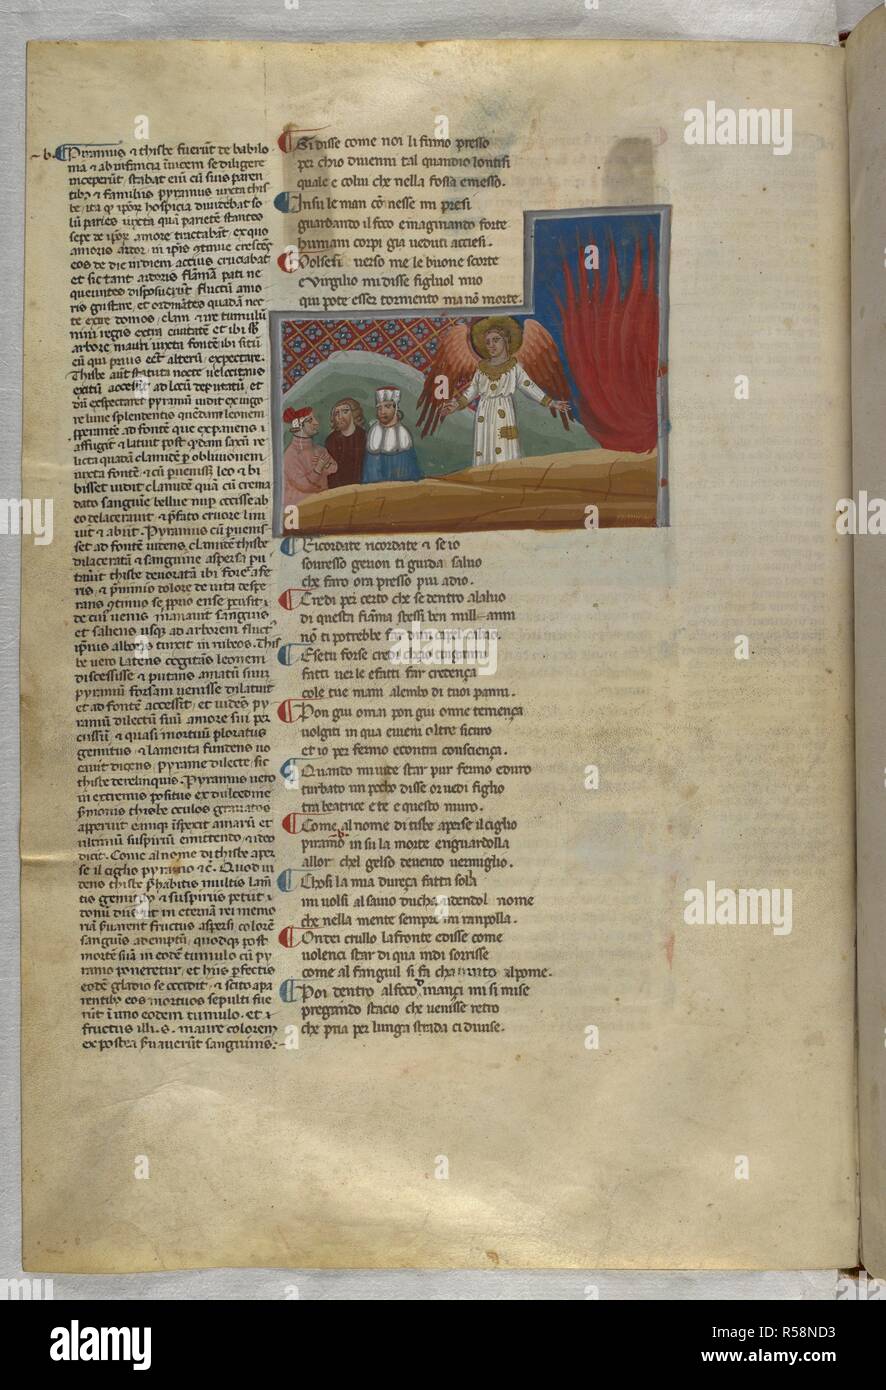 Purgatorio: The Angel of Chastity shows them the fire. Dante Alighieri, Divina Commedia ( The Divine Comedy ), with a commentary in Latin. 1st half of the 14th century. Source: Egerton 943, f.111v. Language: Italian, Latin. Stock Photo